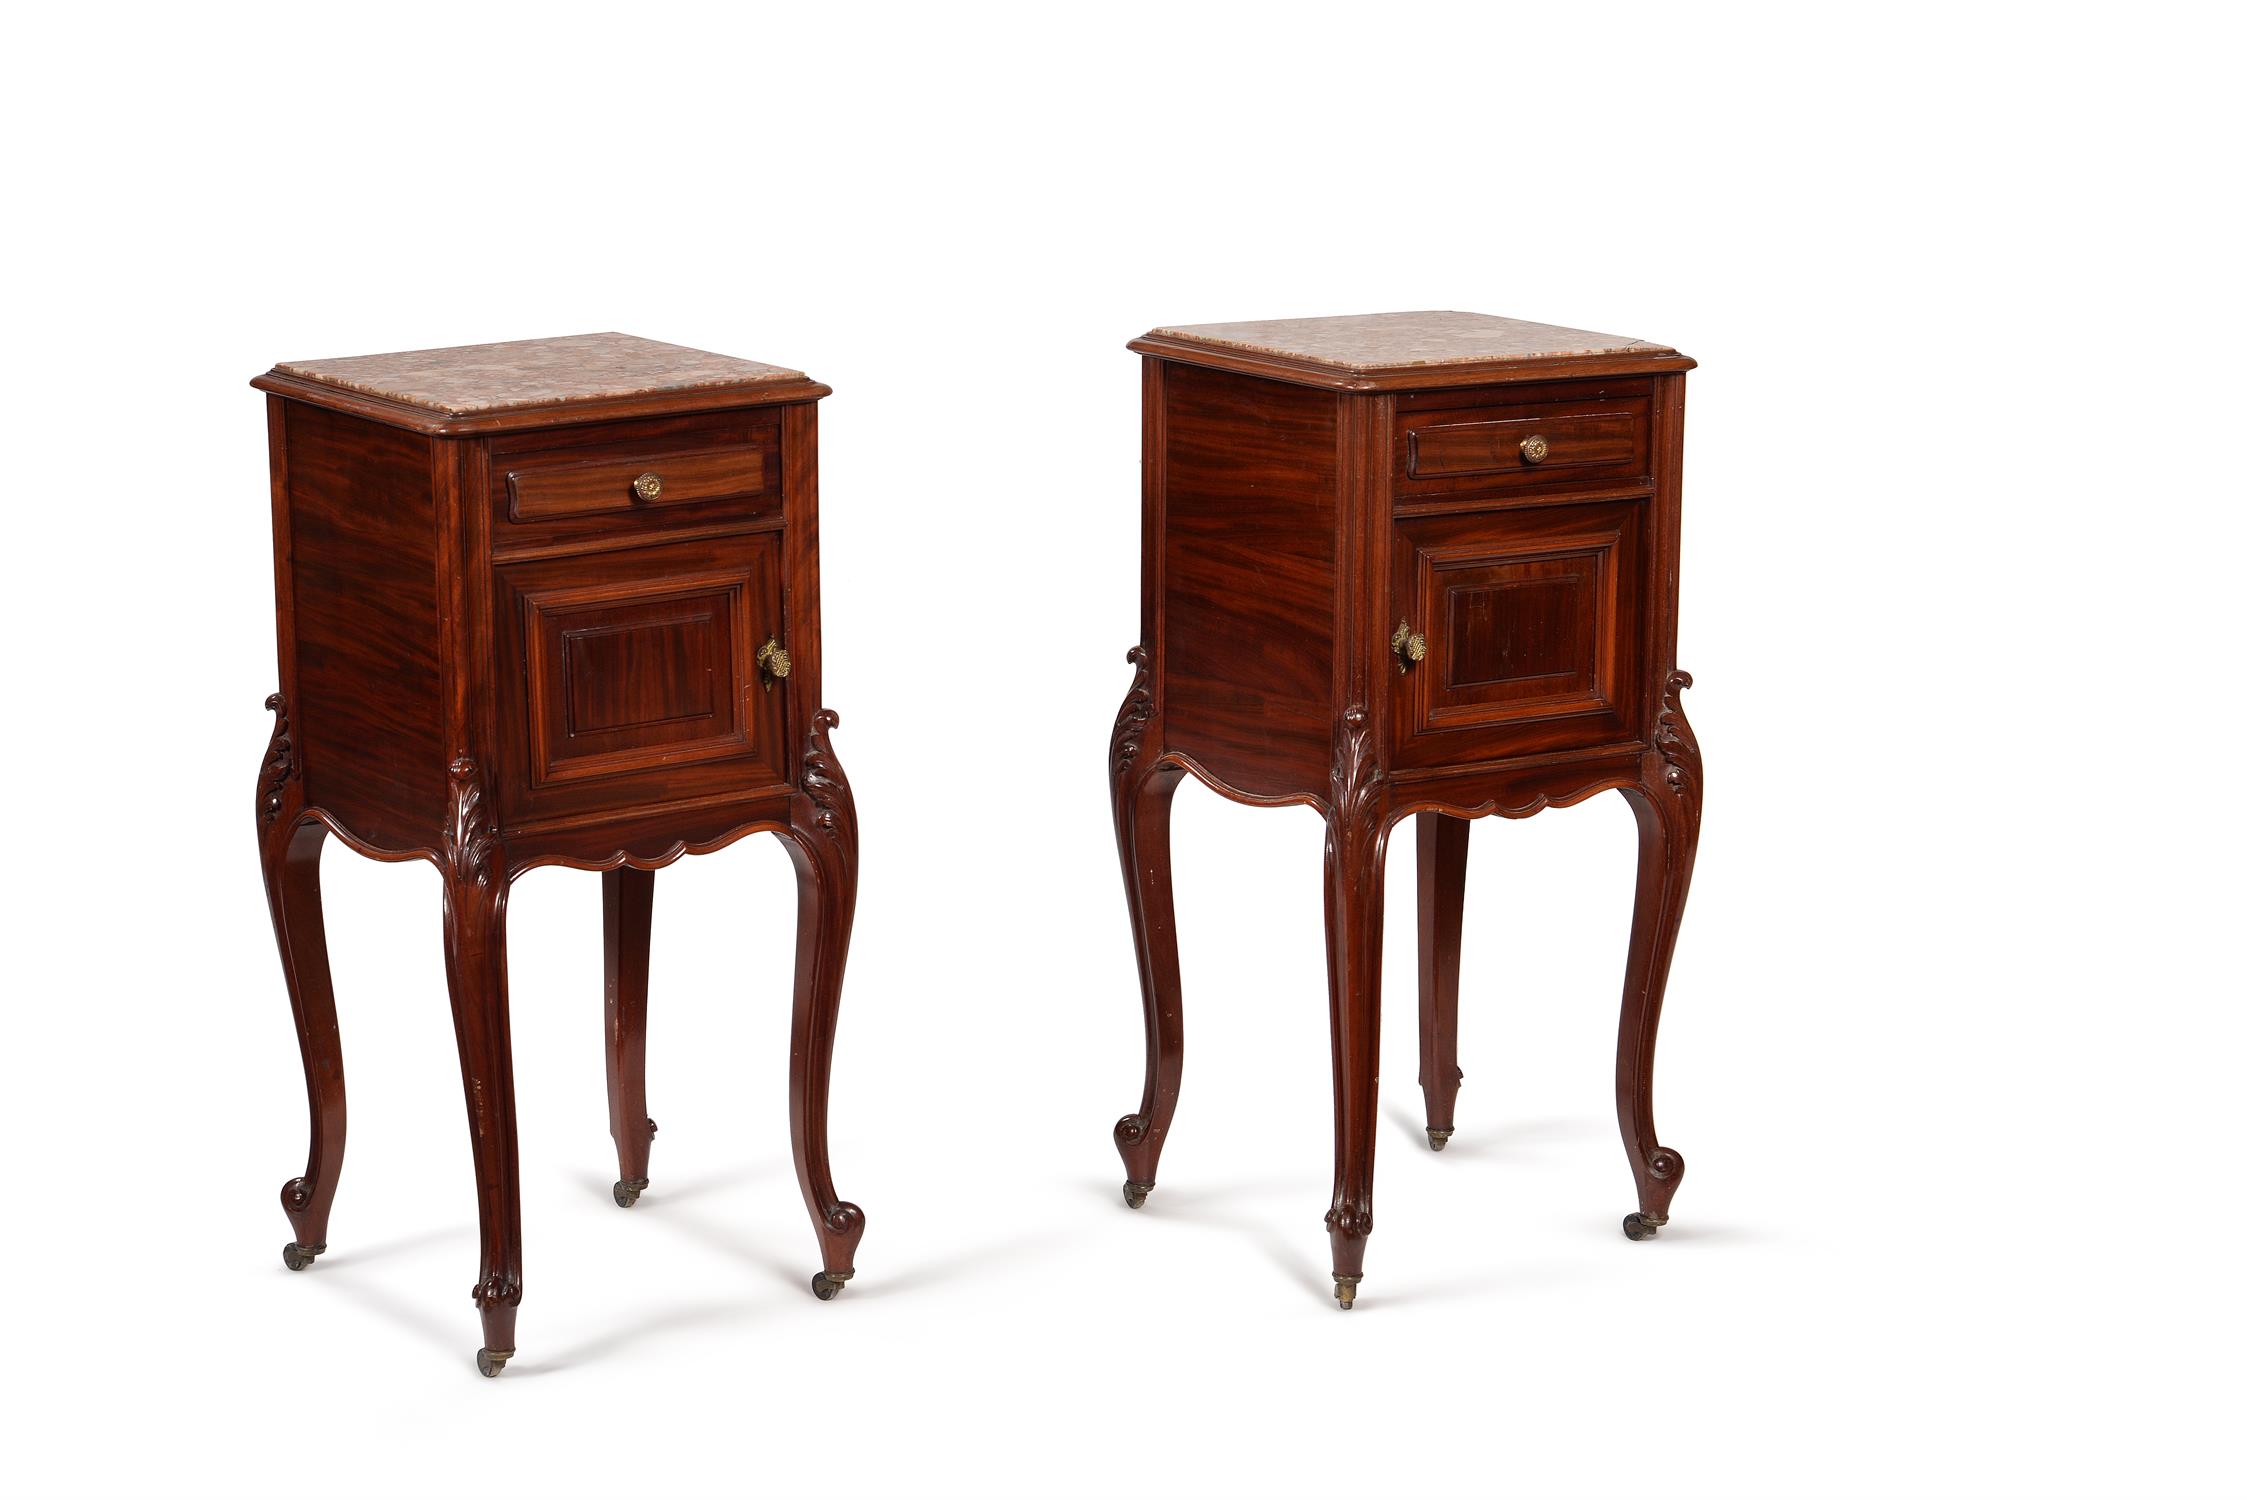 A pair of French mahogany bedside cabinets, late 19th/early 20th century